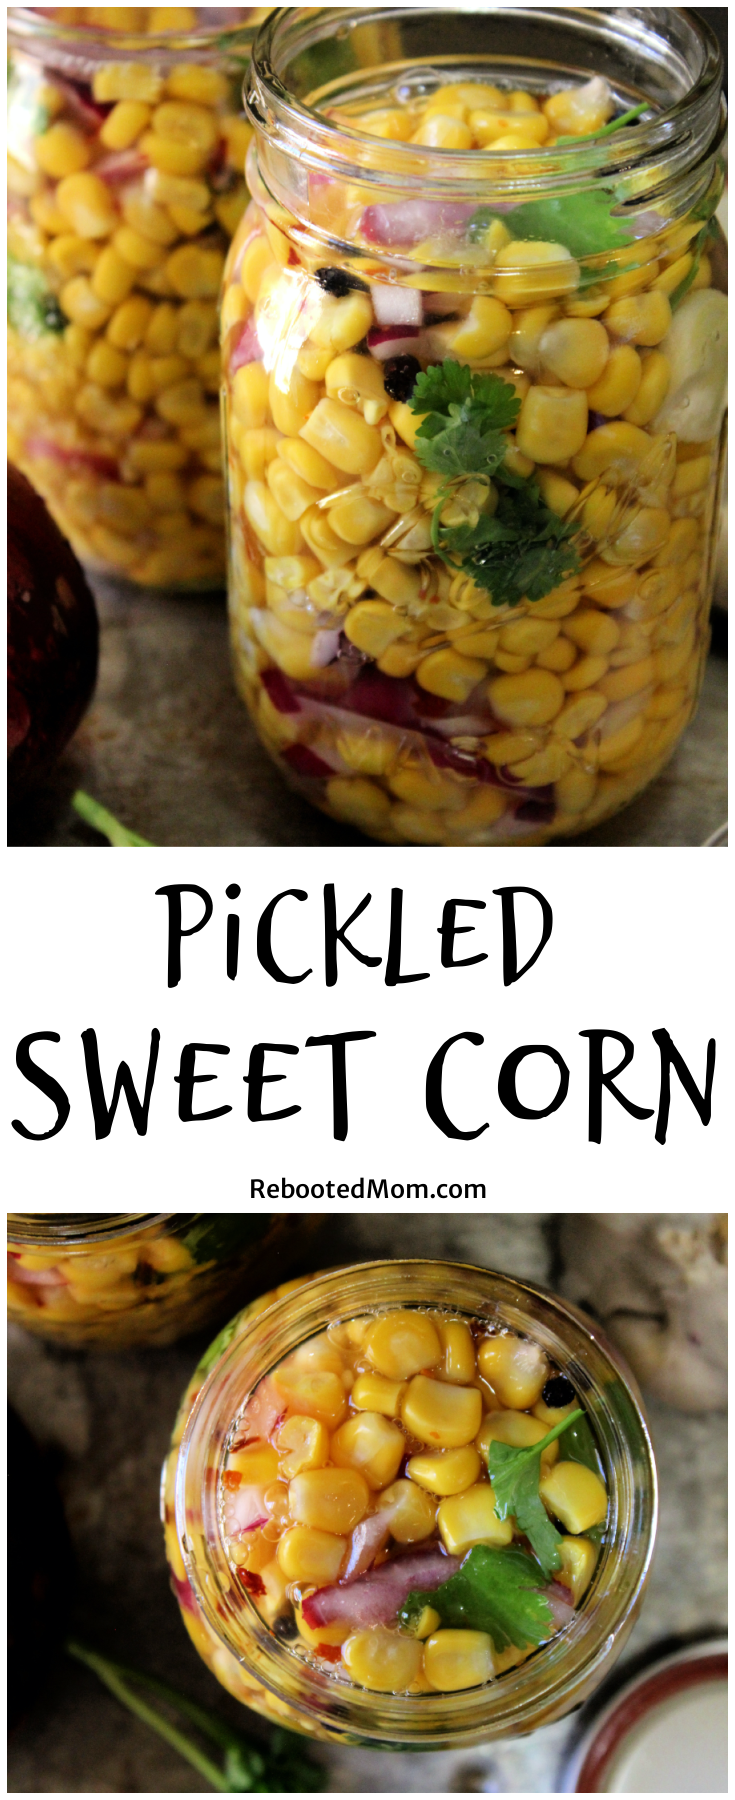 Pickled Sweet Corn combines all of your favorite summer flavors in a sweet yet spicy condiment that’s perfect to enjoy on your favorite bratwurst or burger! 